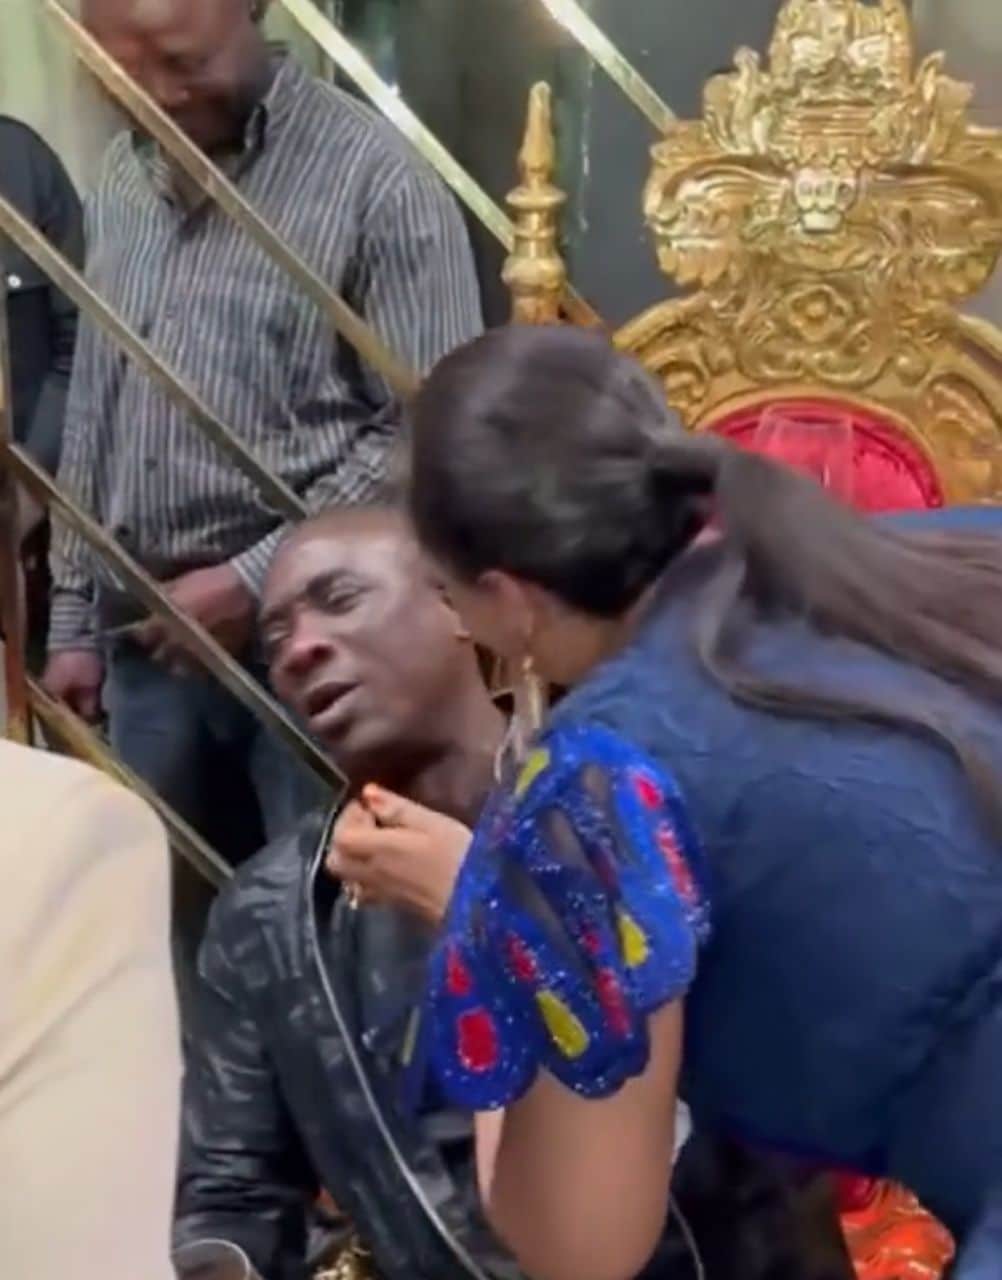 "This is embarrassing" — Netizens fume as Kwam 1 rejects kiss from wife publicly (Video)